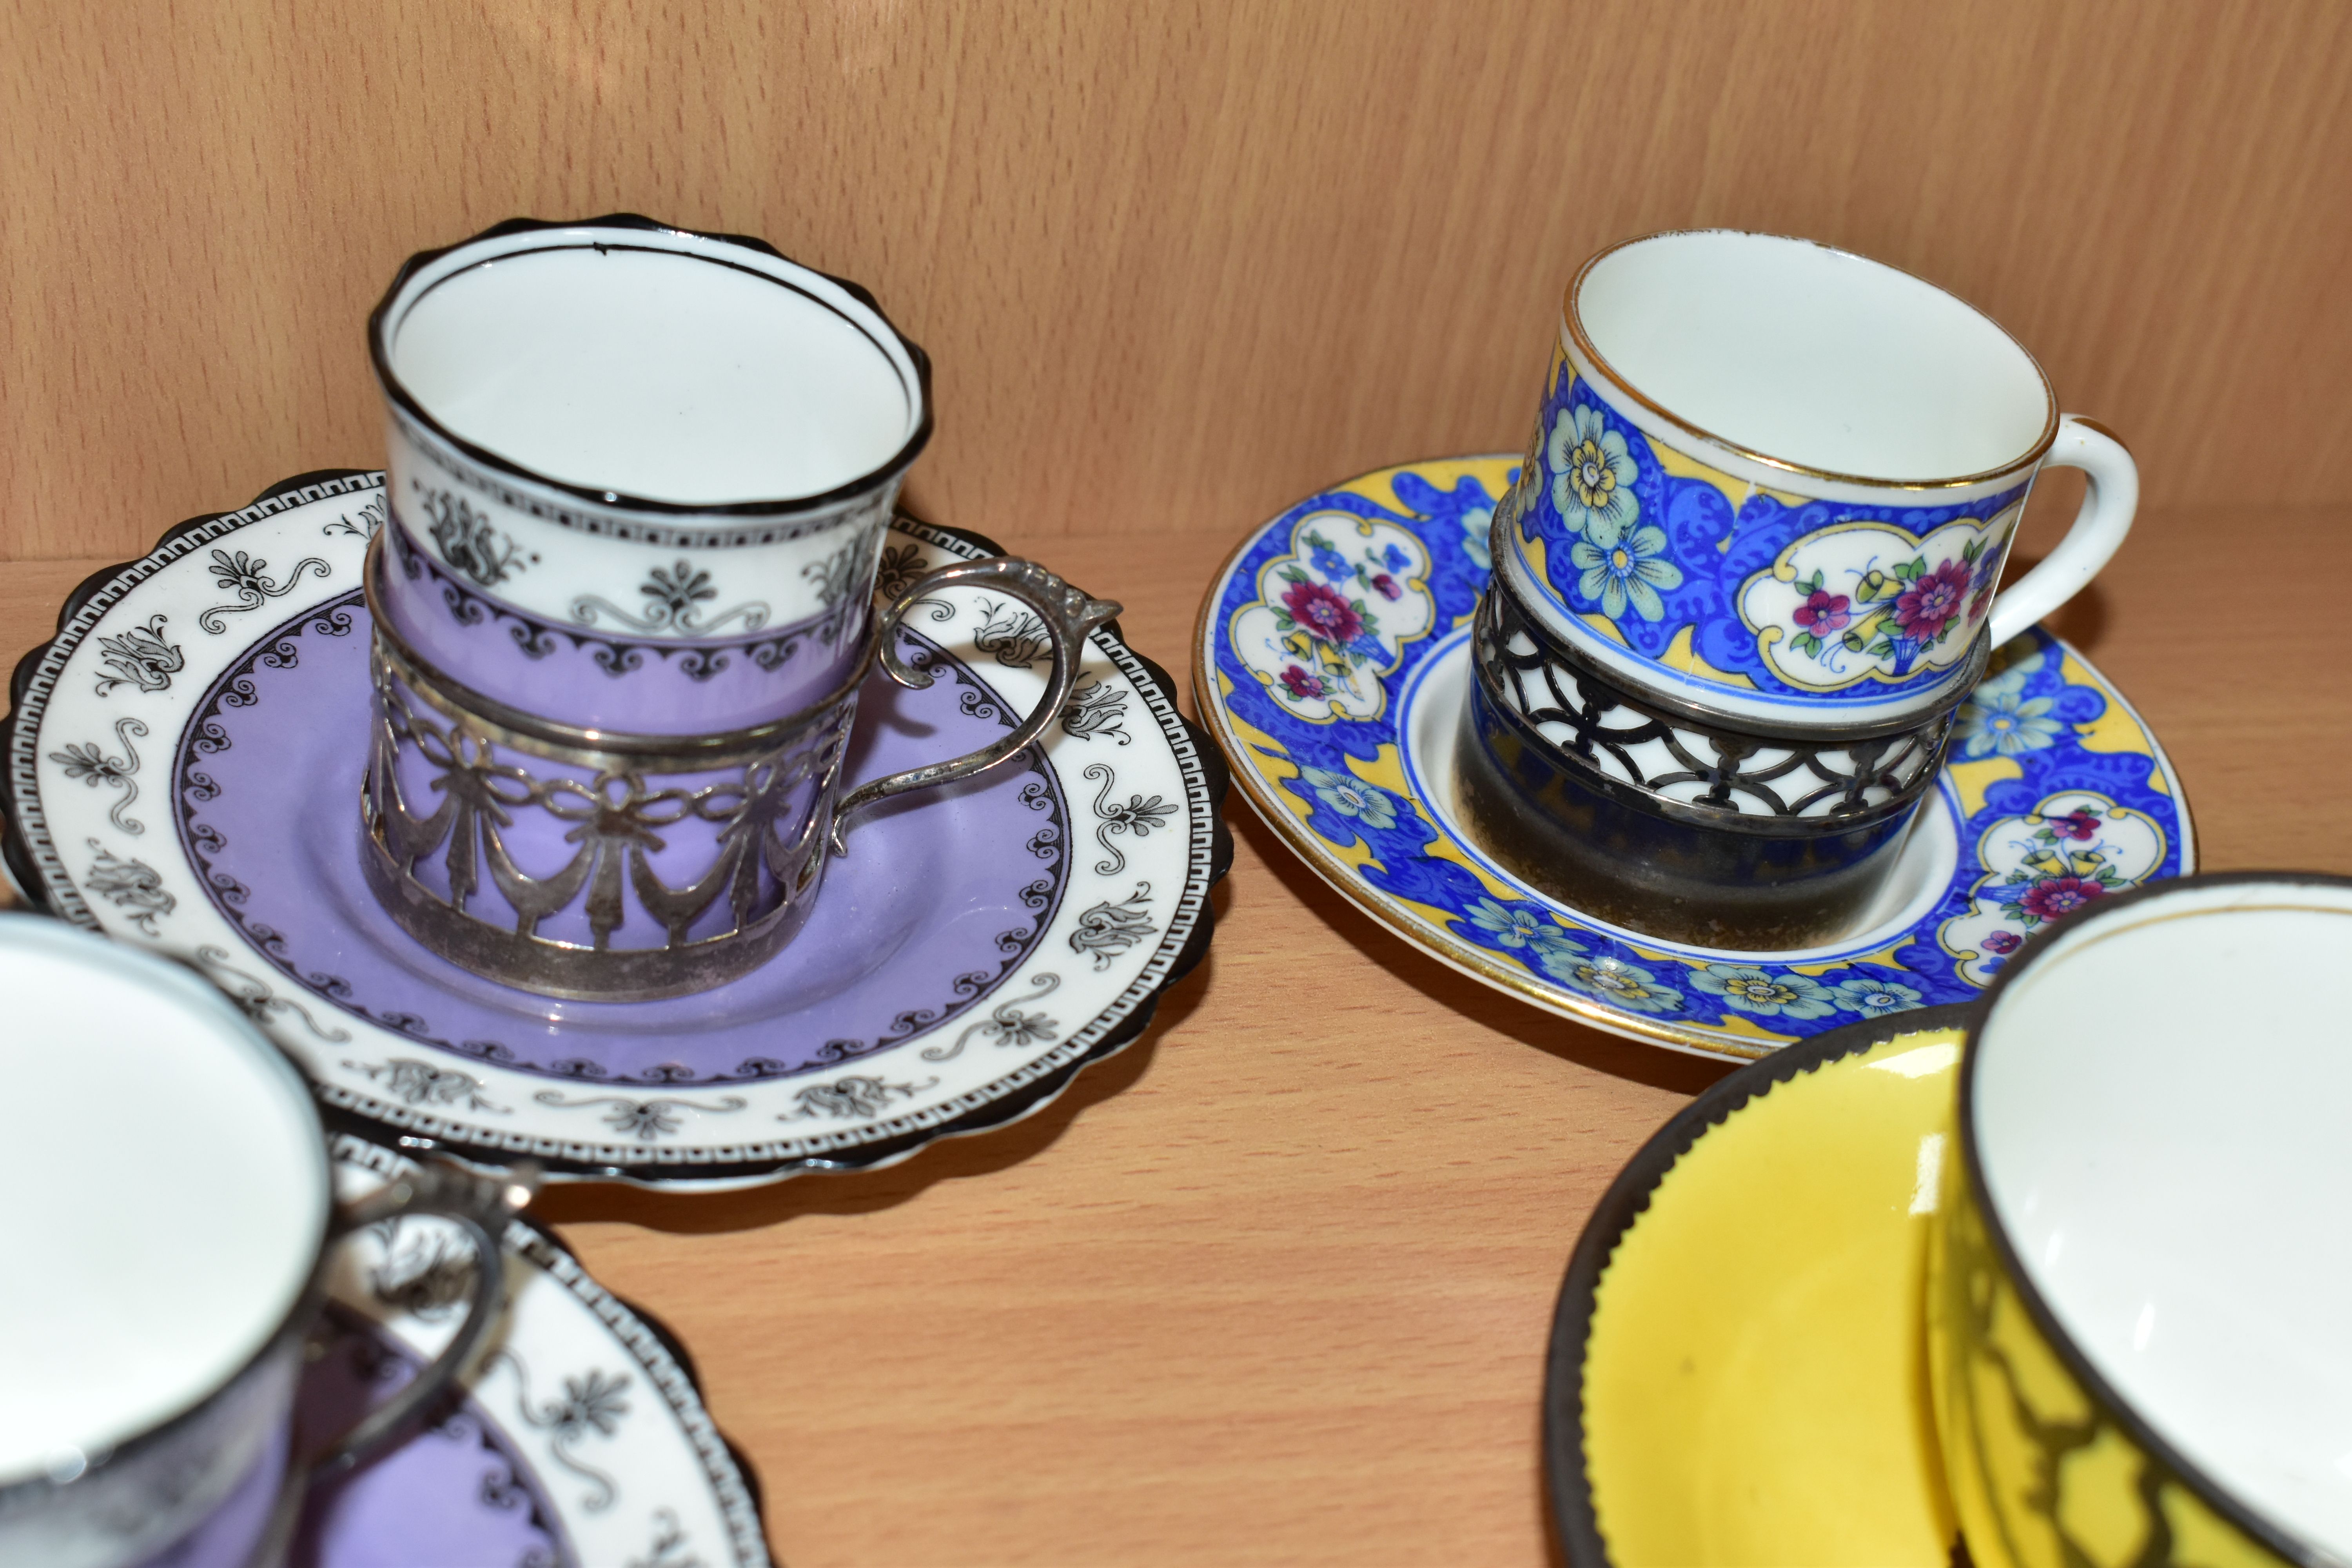 AN EARLY 20TH CENTURY AYNSLEY YELLOW TEA CUP AND SAUCER WITH WHITE METAL OVERLAY AND SEVEN AYNSLEY - Image 5 of 7